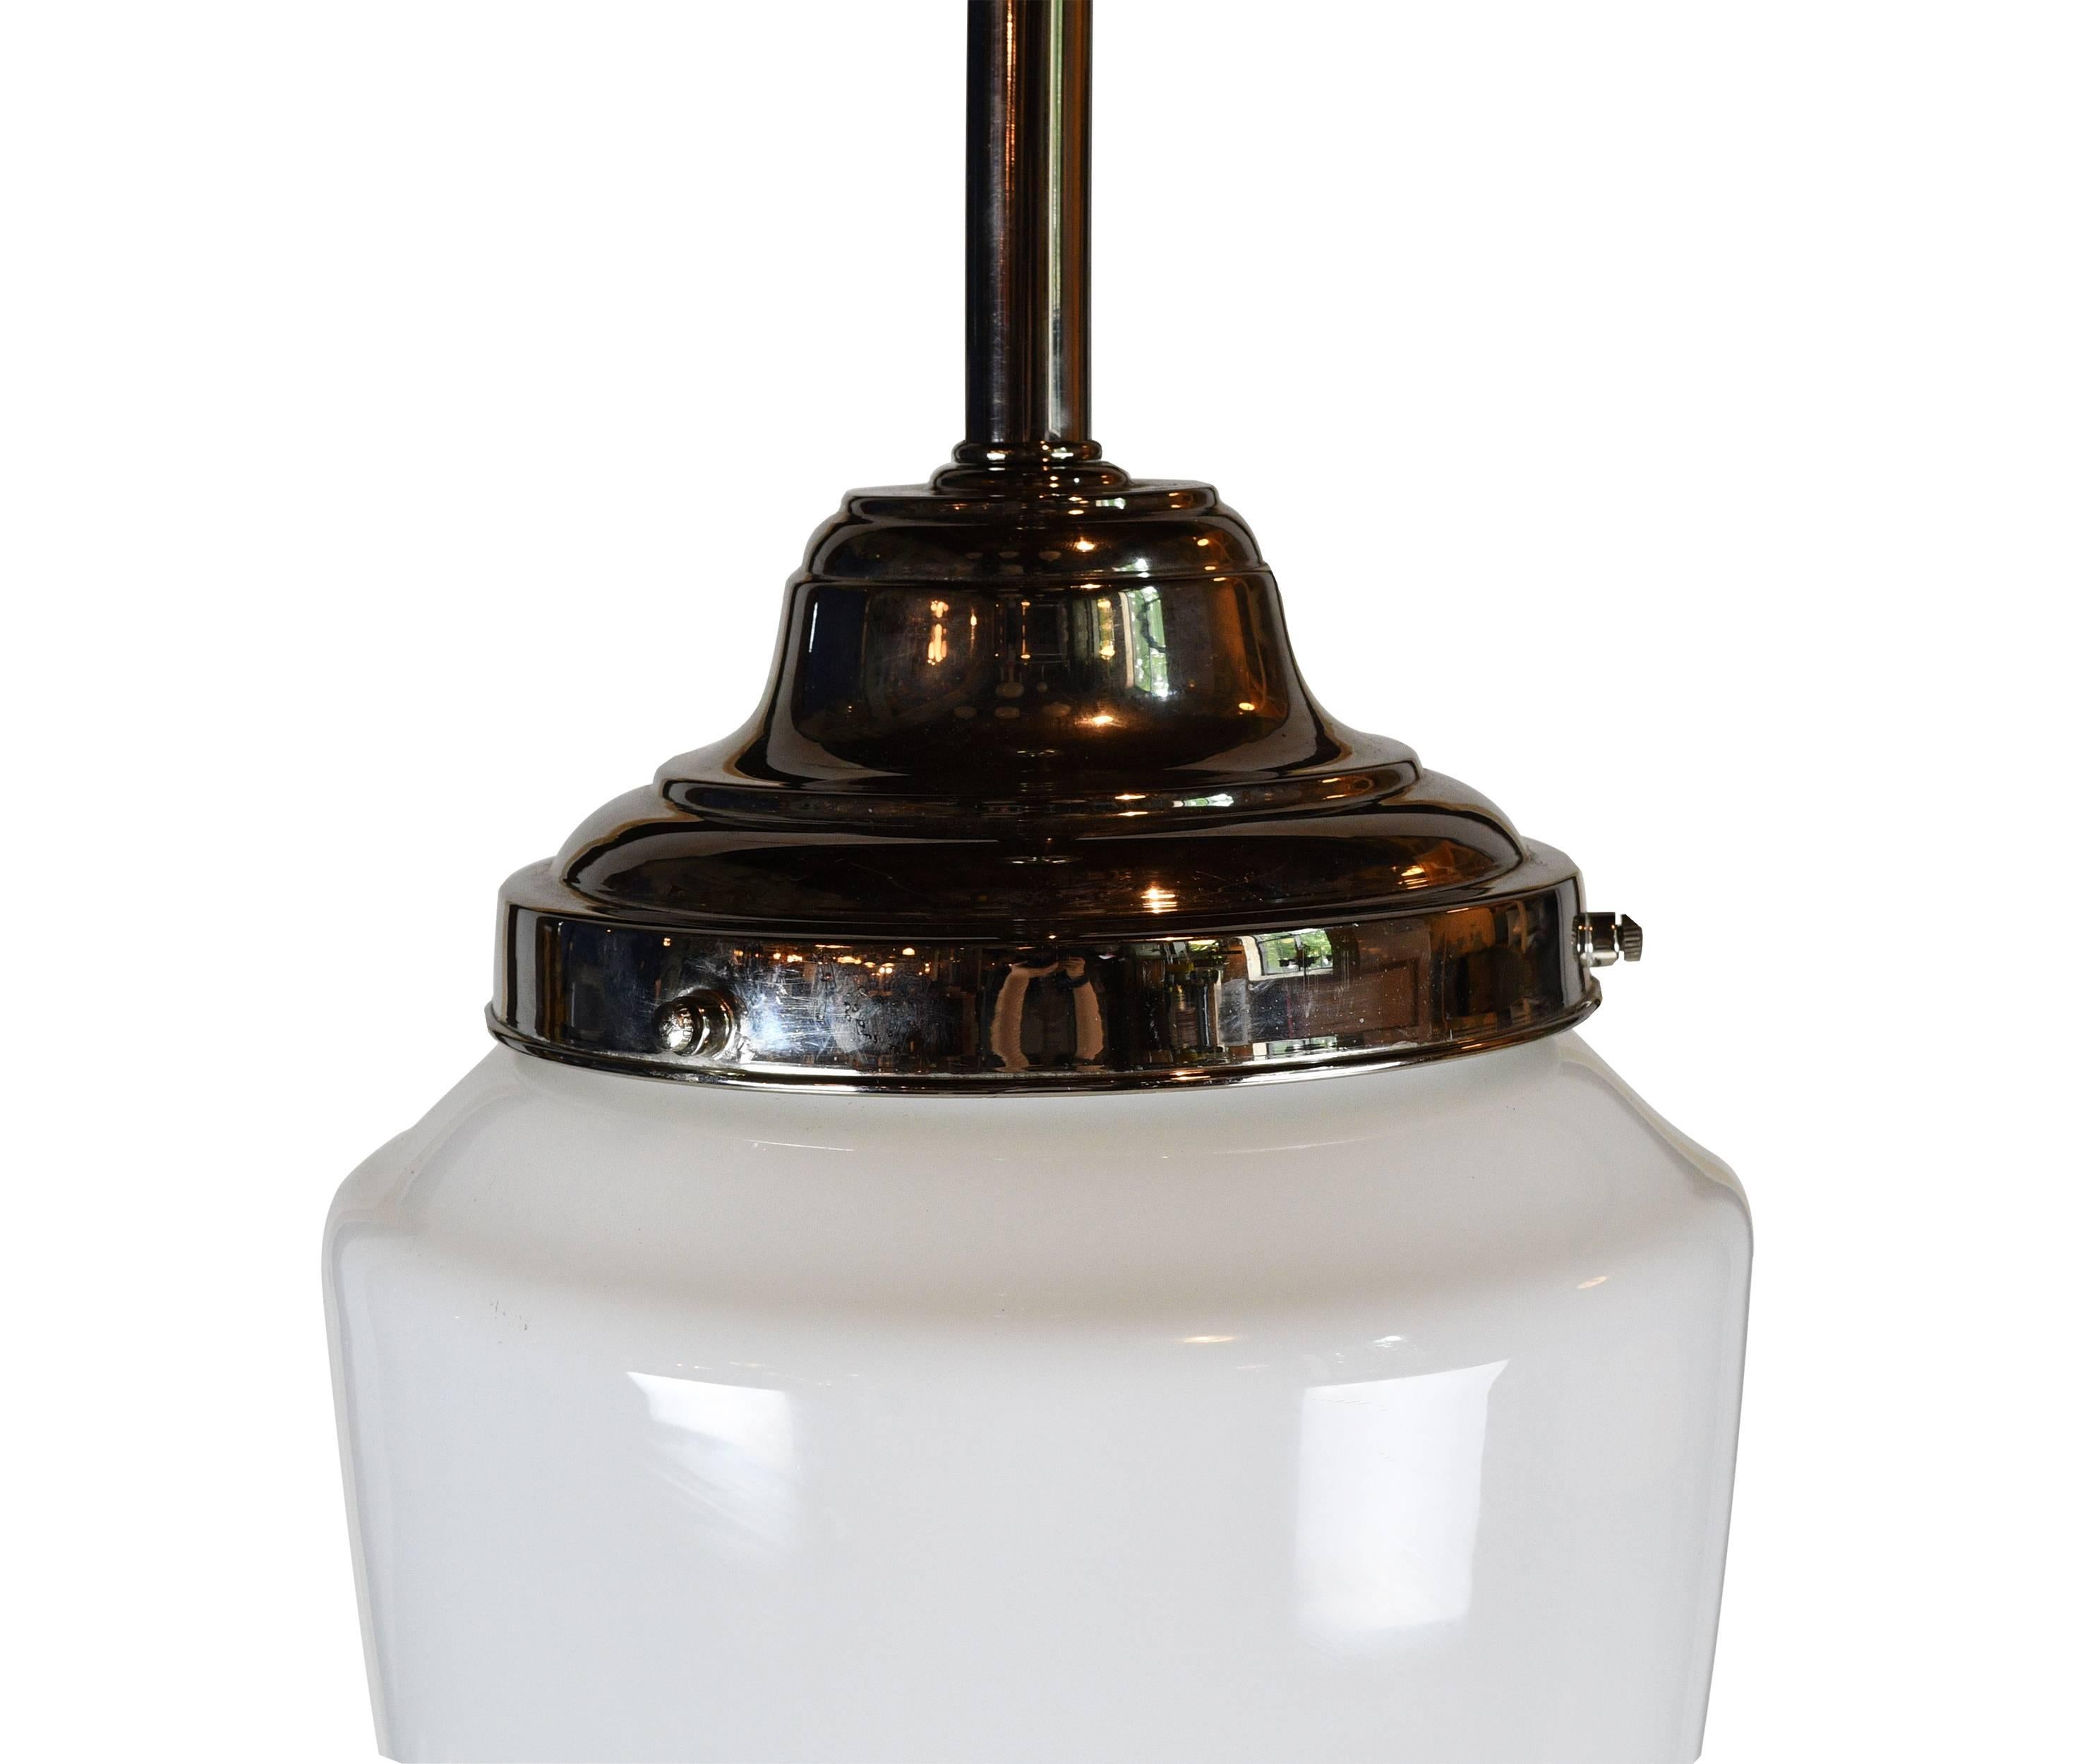 Unique, bullet-shaped schoolhouse pendants with milk glass shades that pair well with the nickel pendant to create a simple yet classy look. The shape of the shades is different than many other classic schoolhouse pendants, giving them a personality